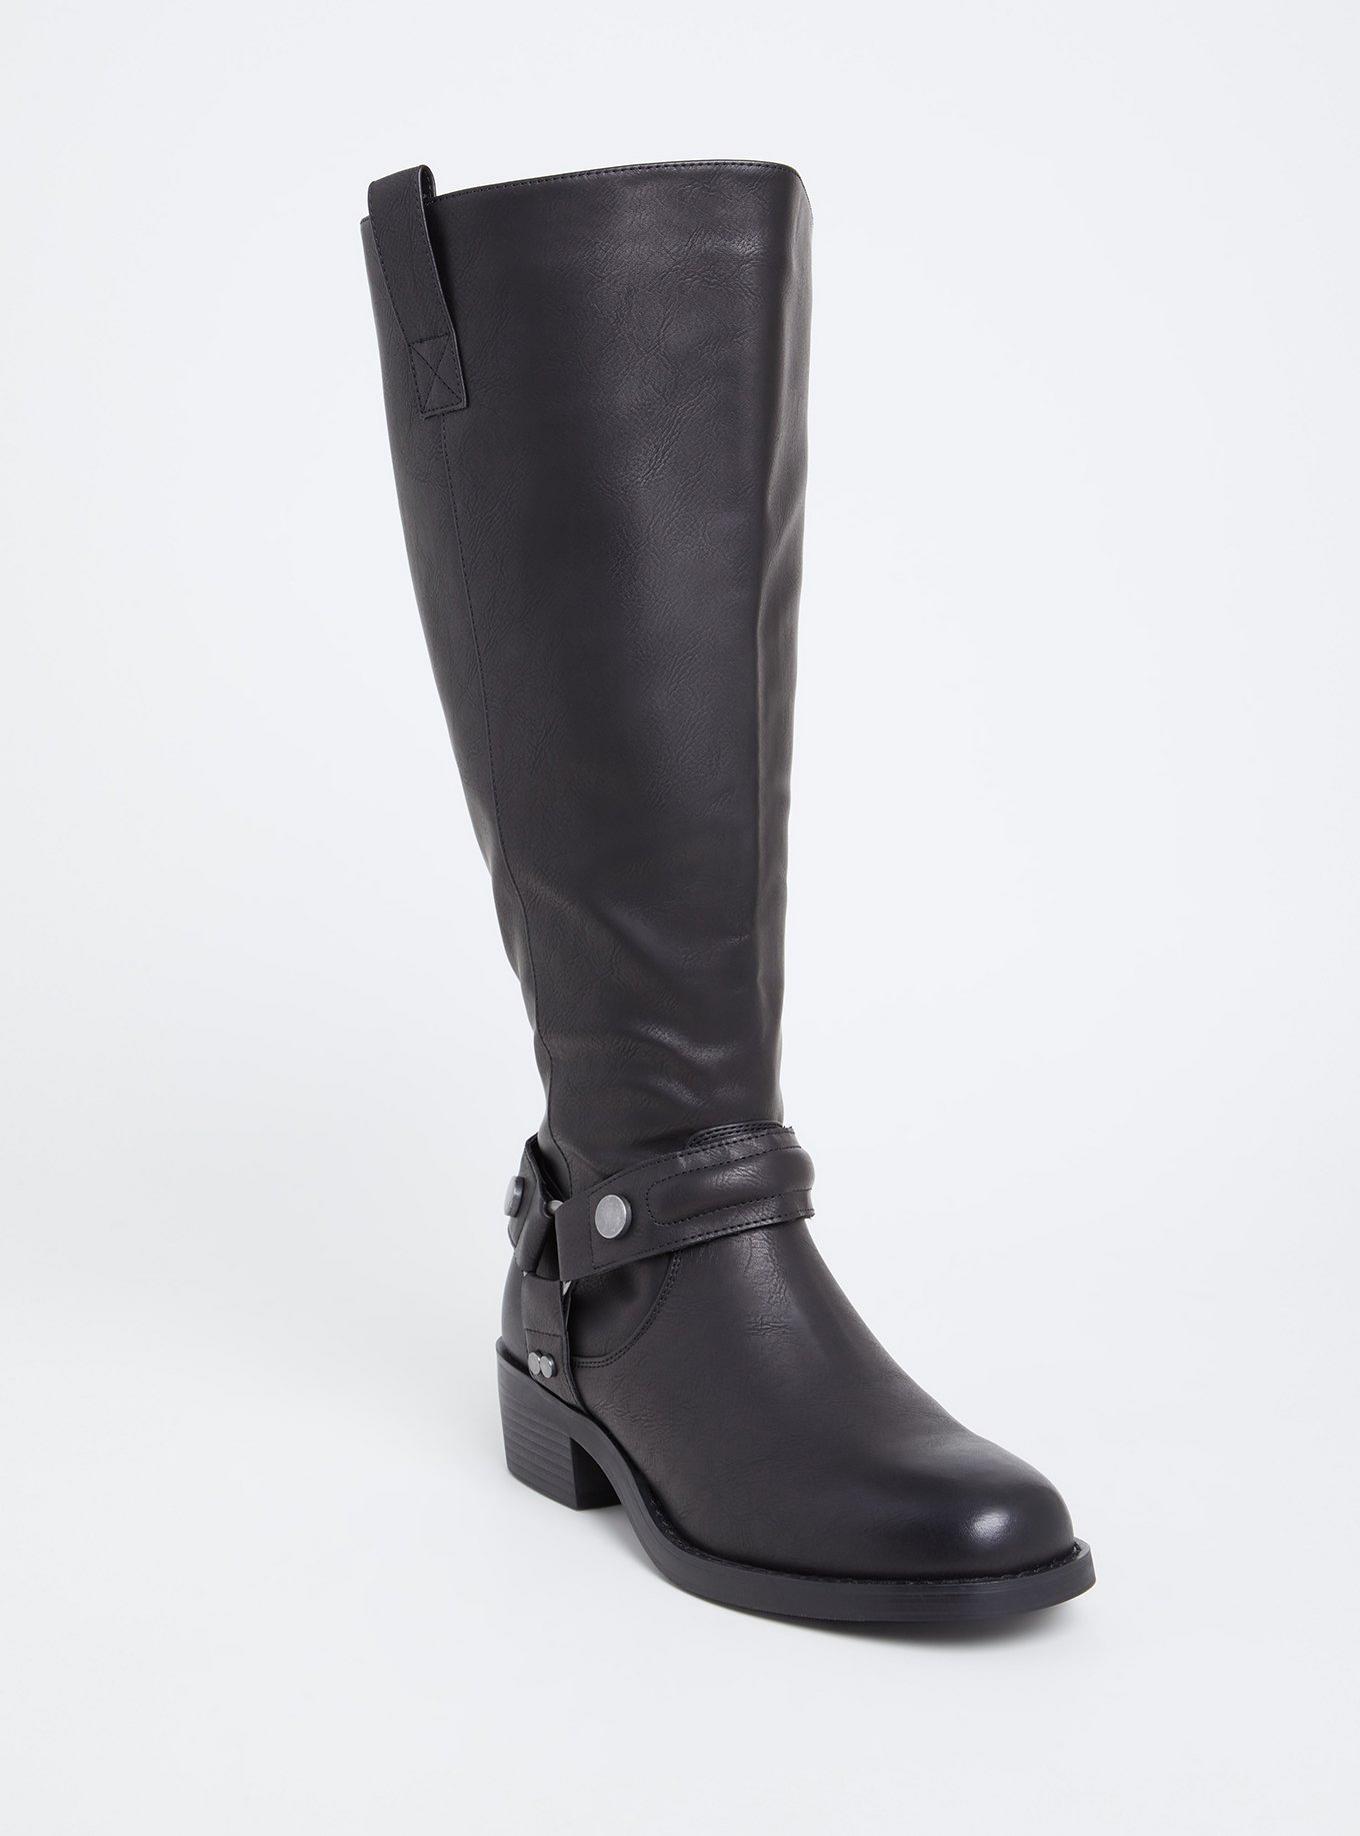 Plus Size - Black Faux Leather Knee-High Boot (WW) - Torrid